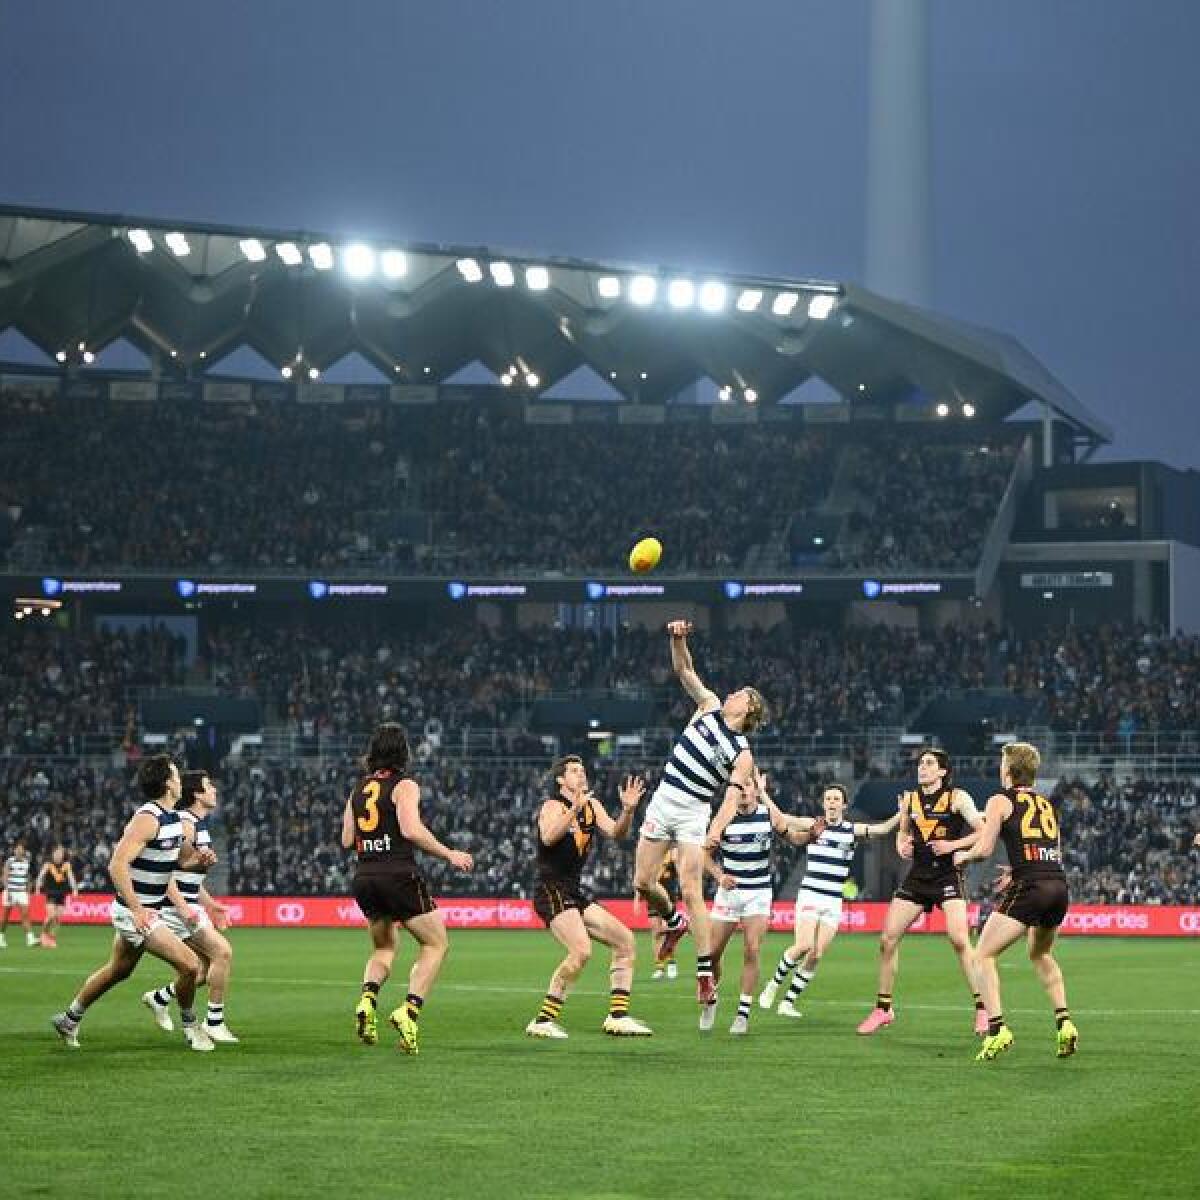 Action from Geelong against Hawthorn.